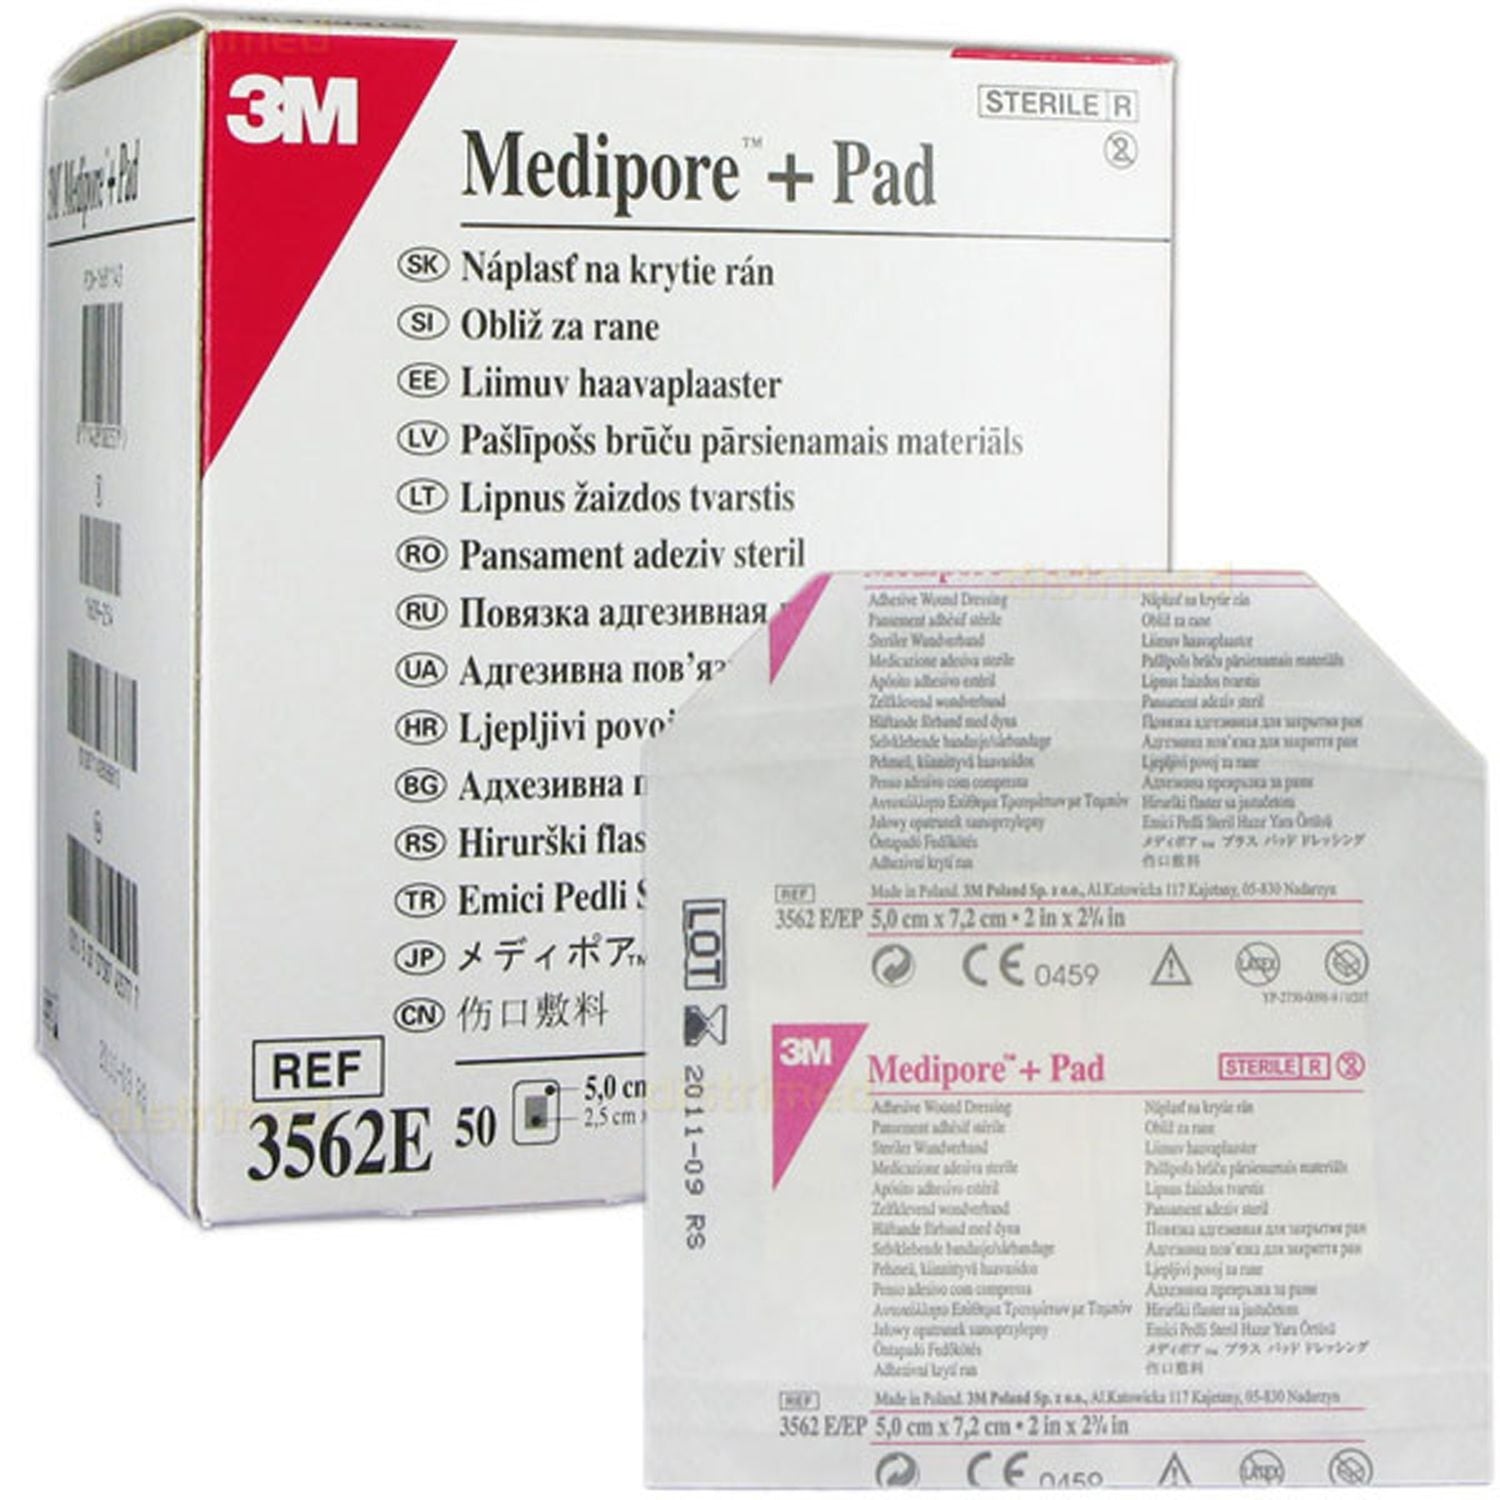 3M Medipore + Pad Adhesive Wound Dressing | 10 x 15cm | Pack of 25